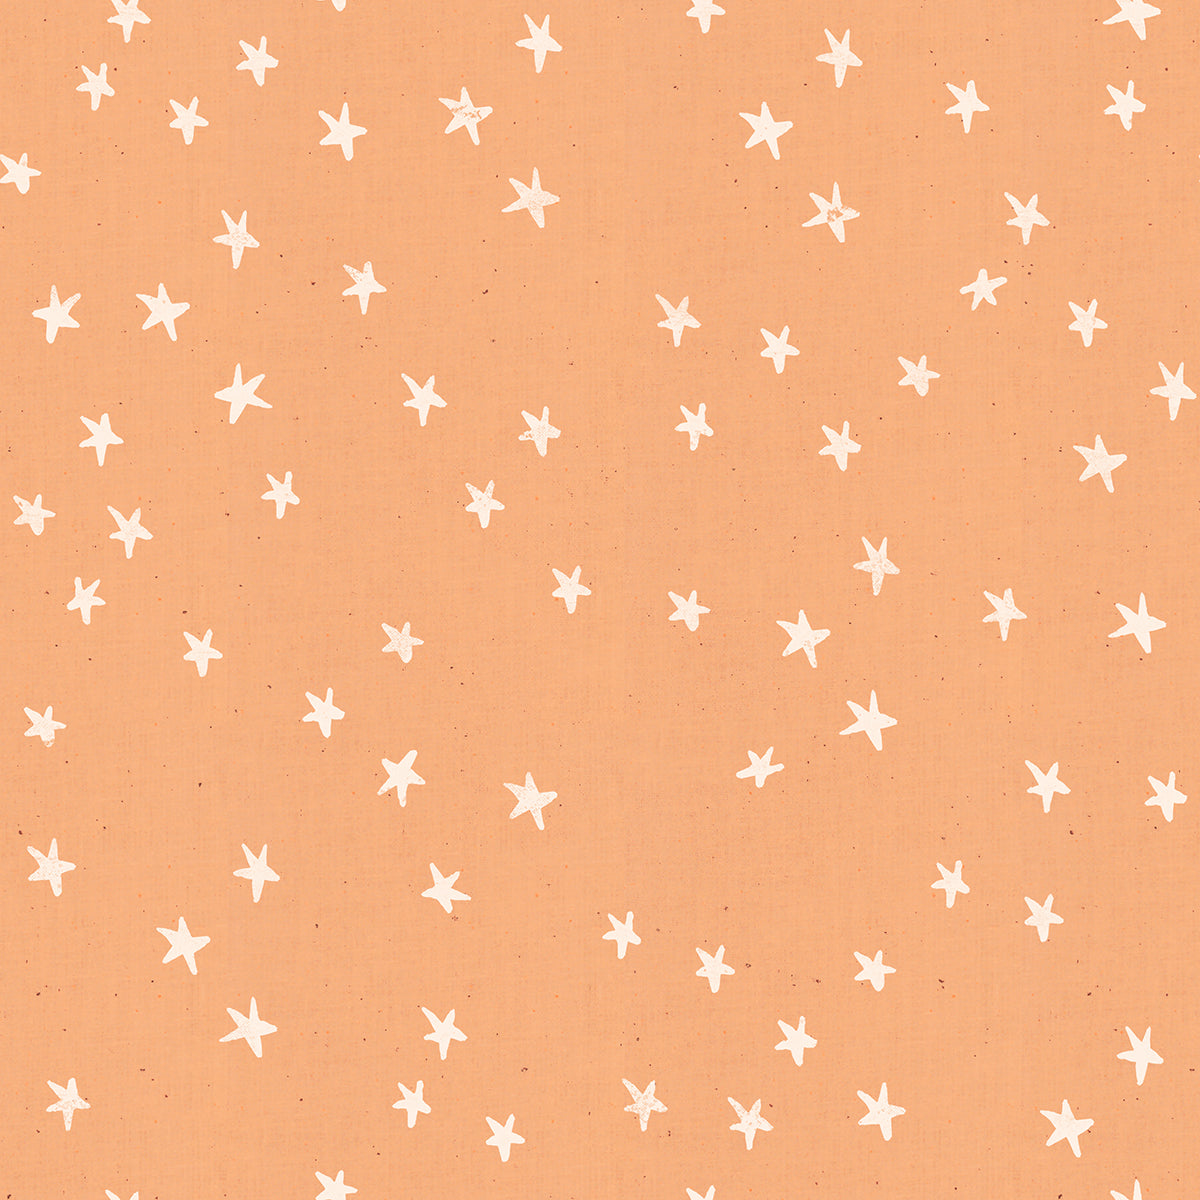 Starry Quilt Fabric - Stars in Warm Peach - RS4006 - 17